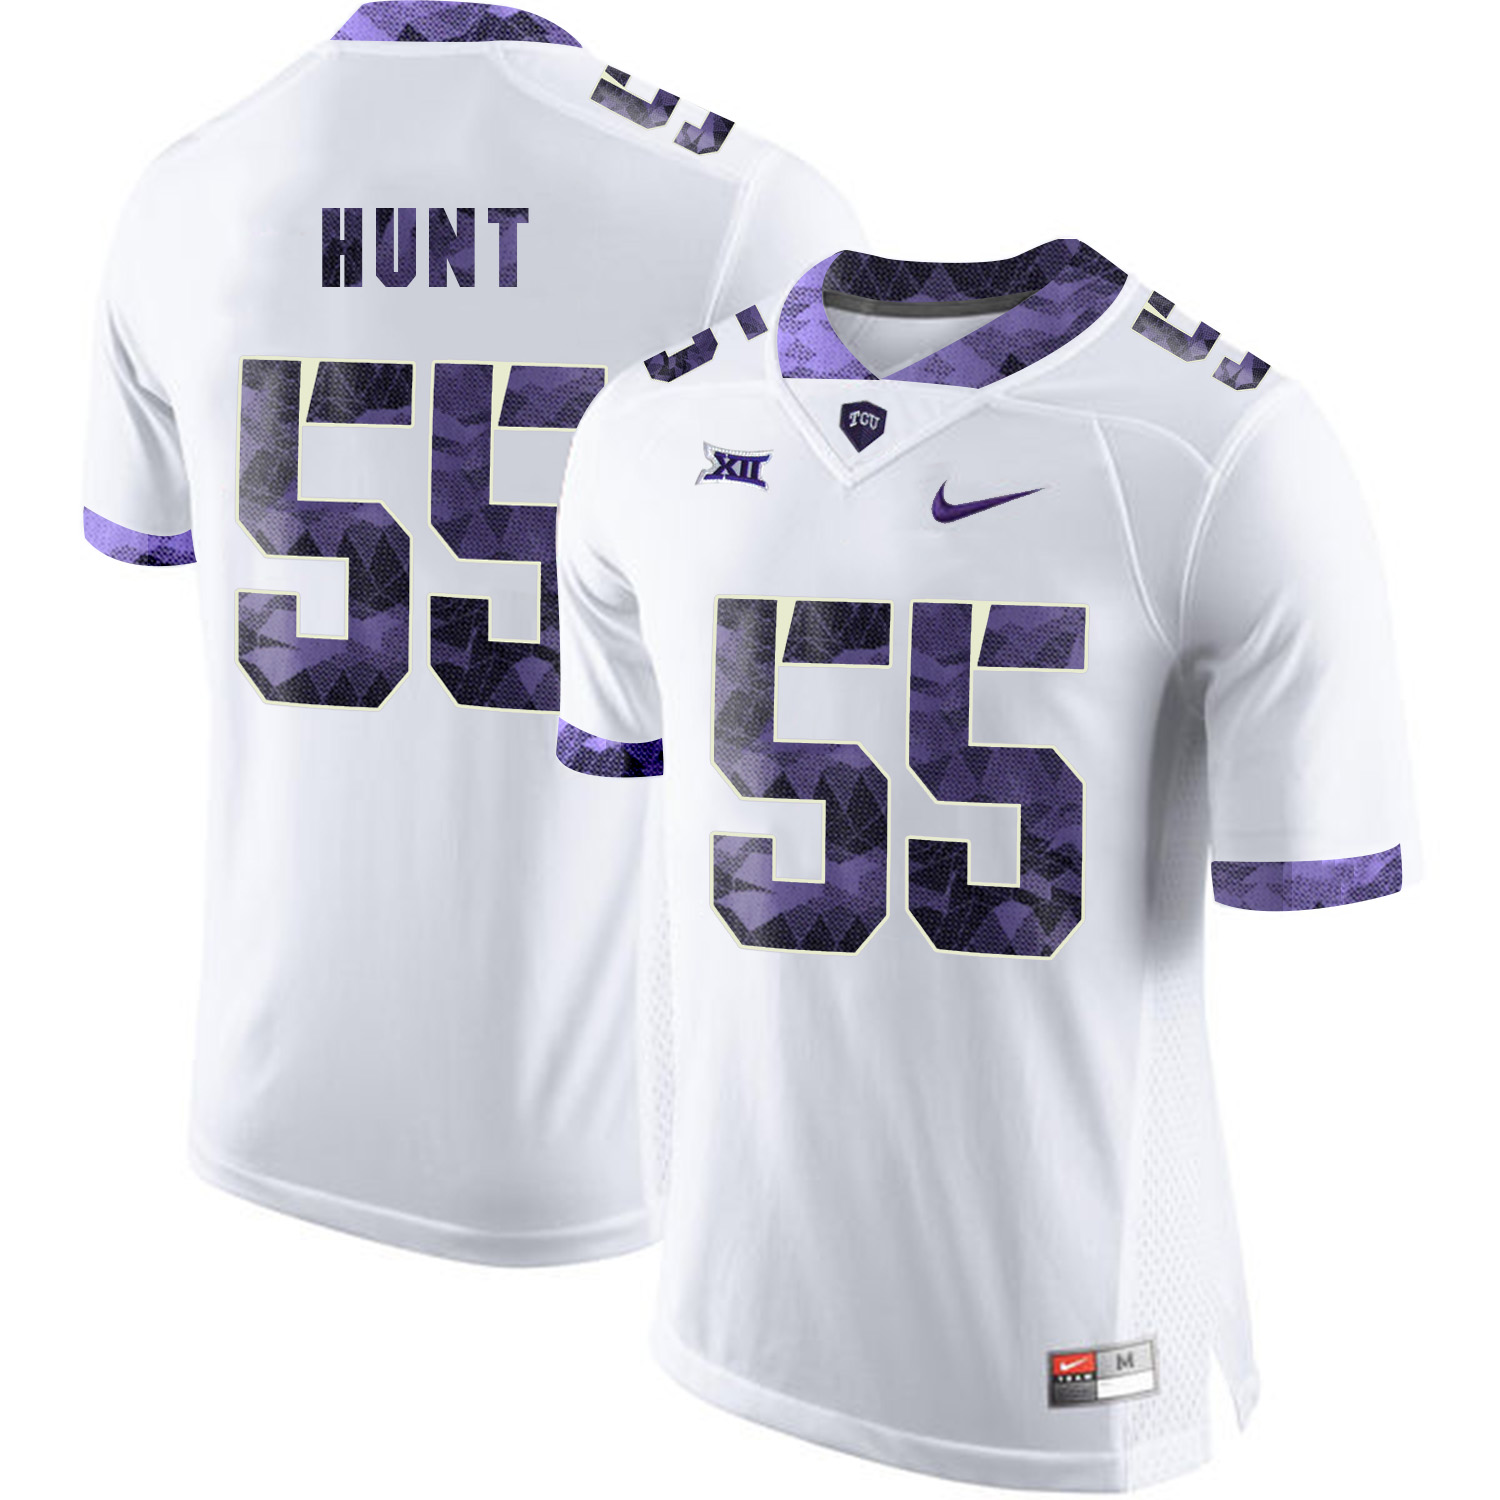 TCU Horned Frogs 55 Joey Hunt White Print College Football Limited Jersey